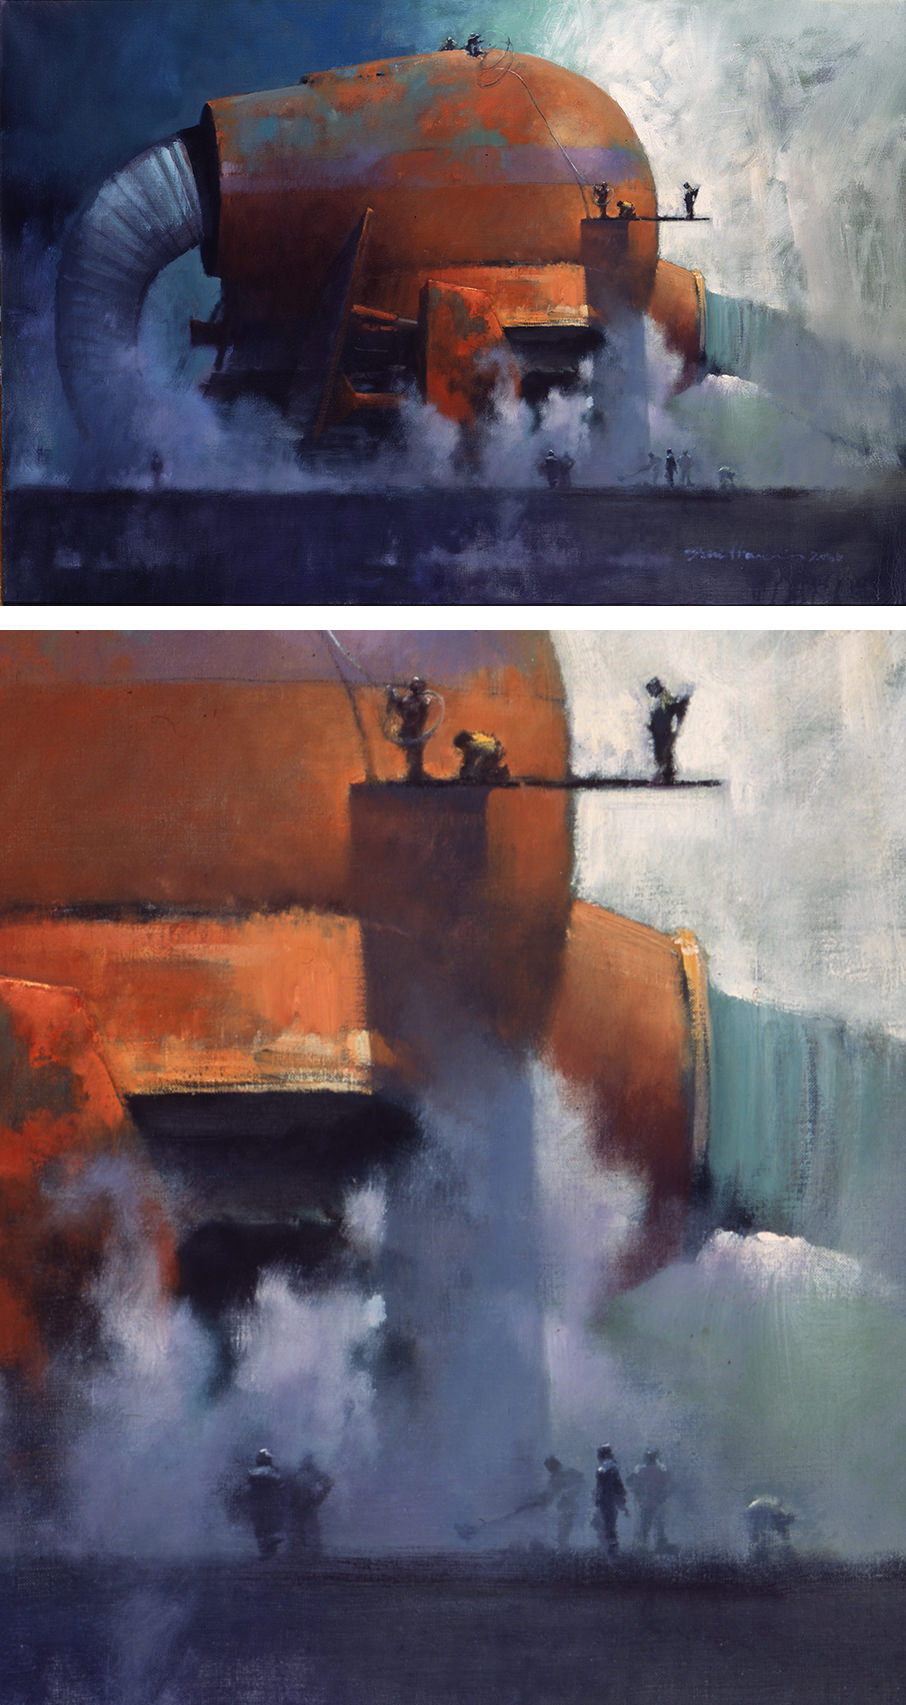 John Harris | Cleaning the Ducts